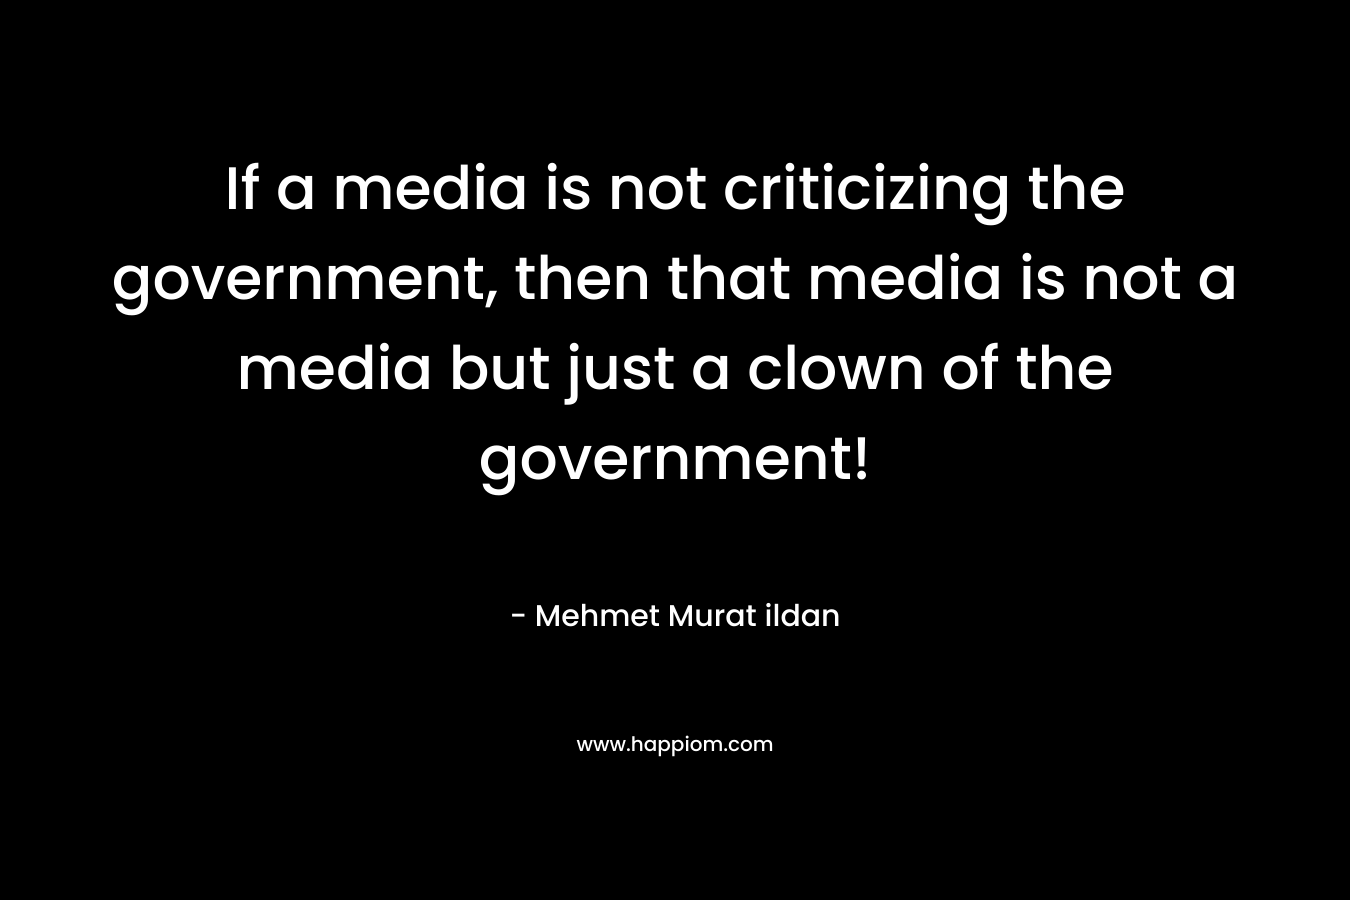 If a media is not criticizing the government, then that media is not a media but just a clown of the government!